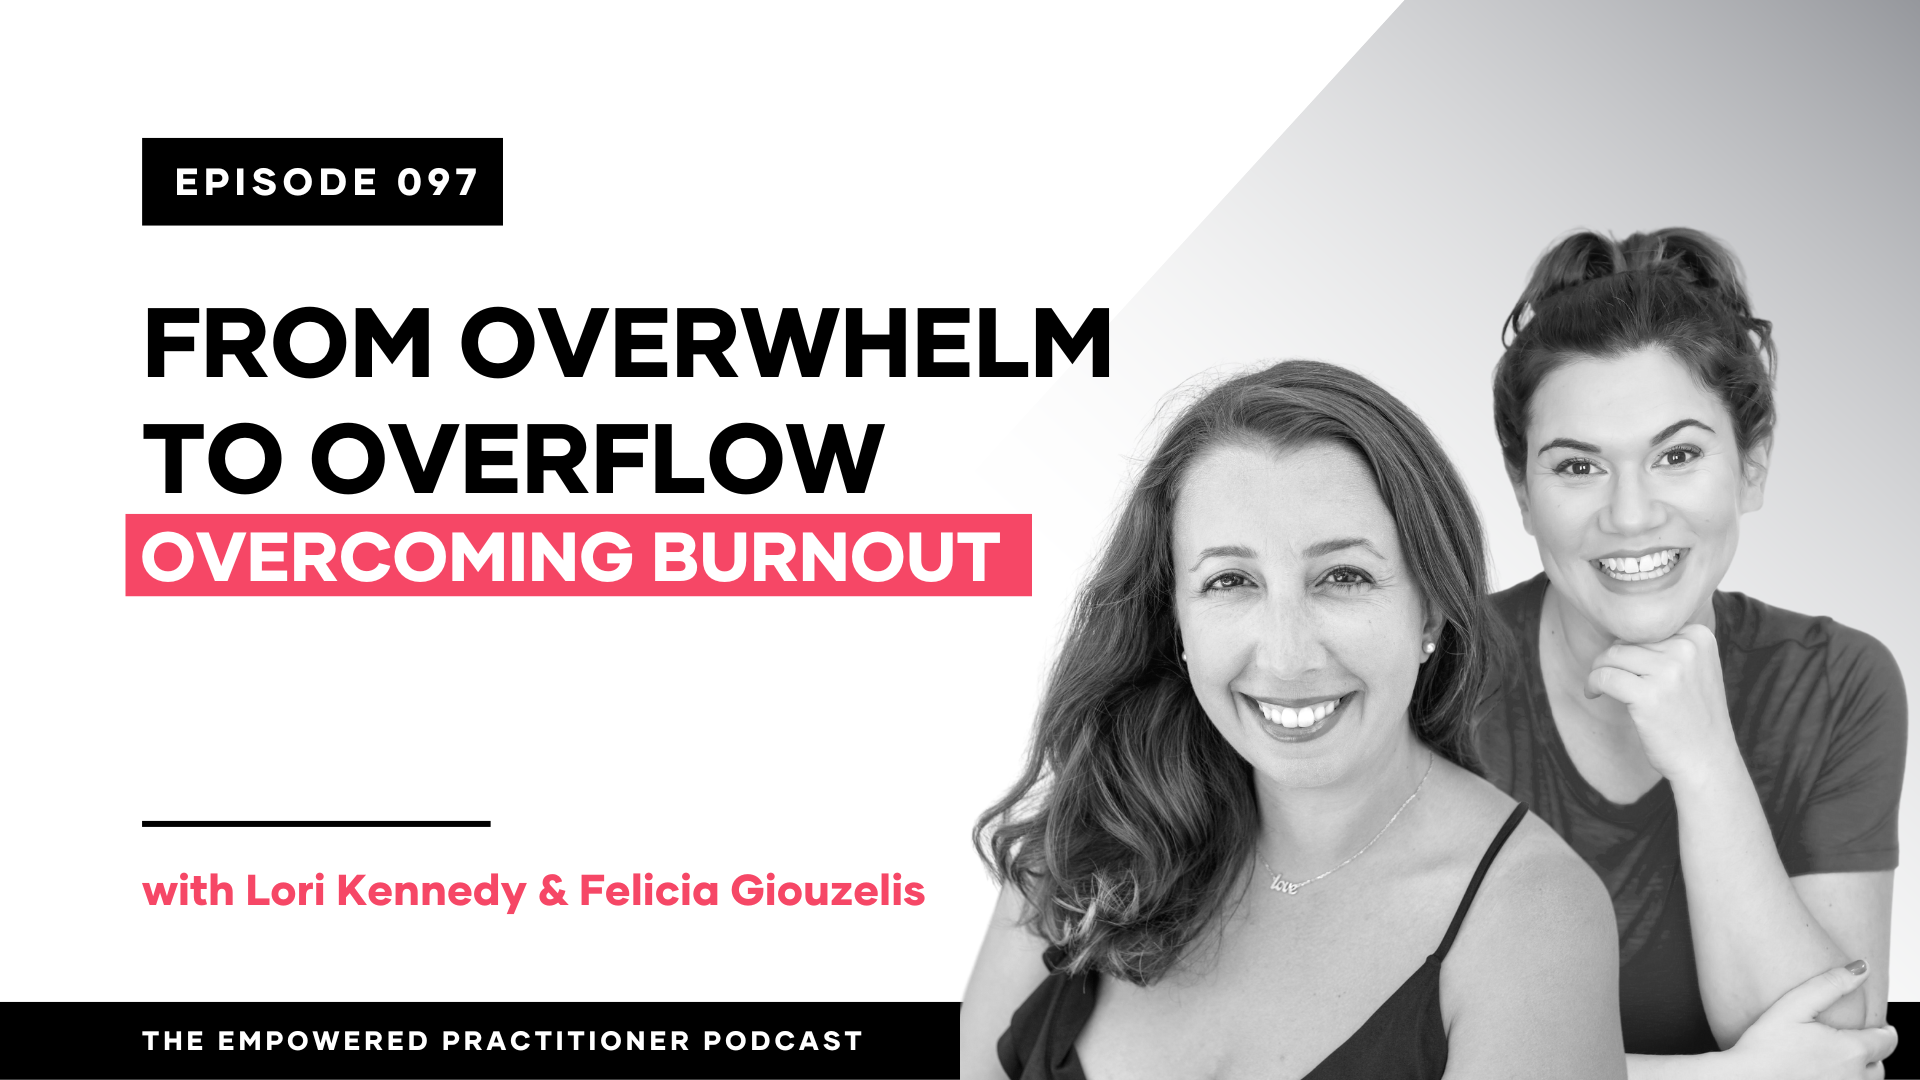 From Overwhelm to Overflow: Overcoming Burnout